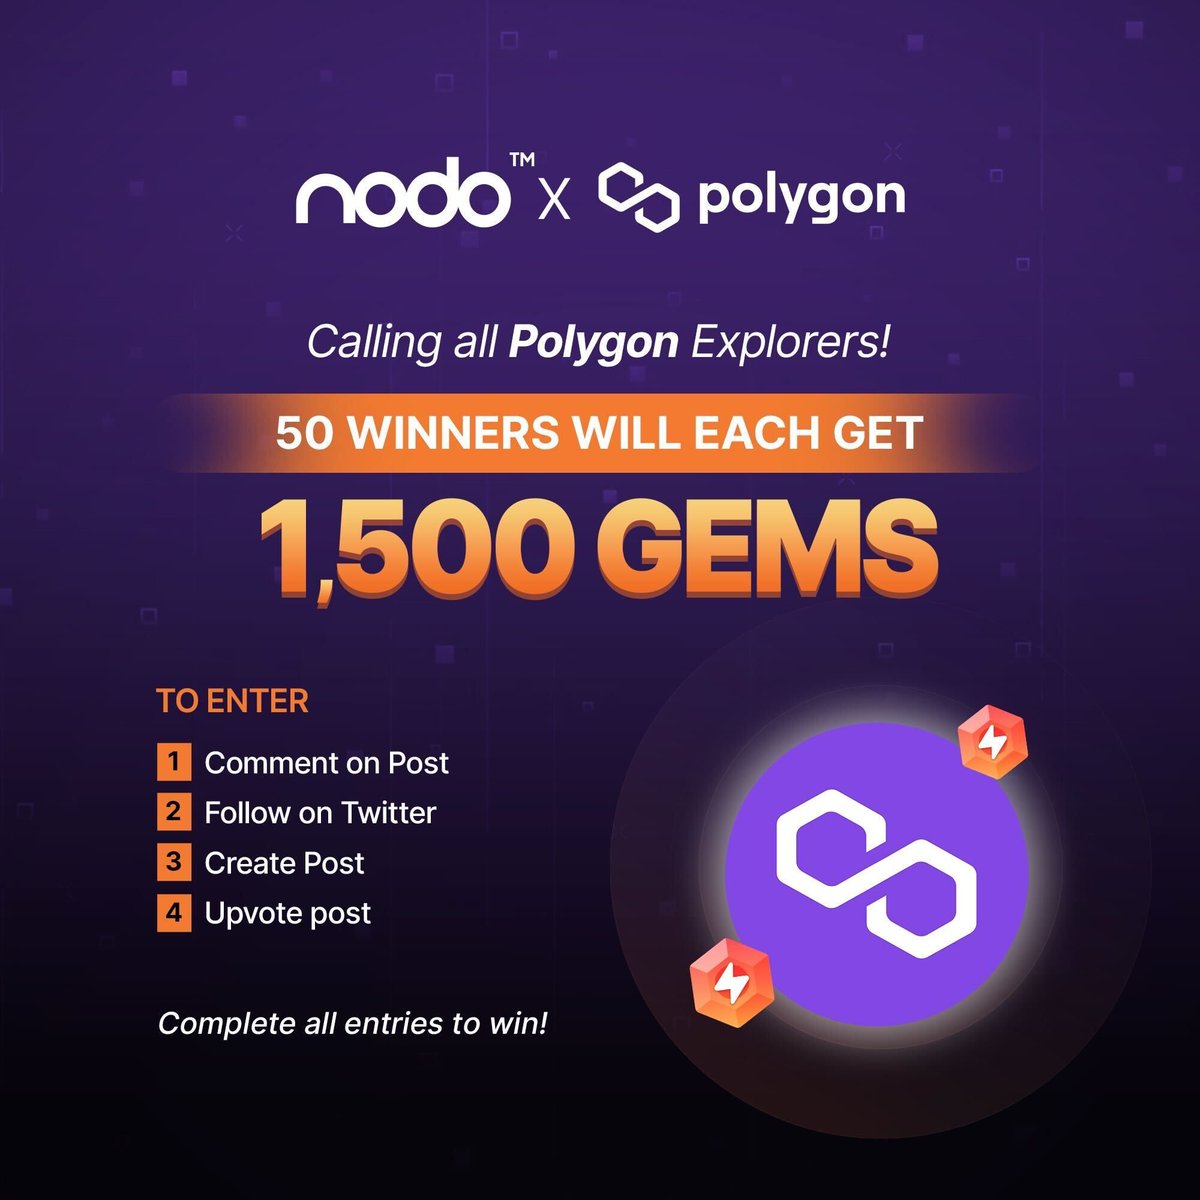 Calling on all Polygon explorers! Don't miss out on the chance to be one of the 50 lucky winners to claim 1500 gems! Explore and engage with @0xPolygon for a chance to win! Get started now: nodo.xyz/product-commun…